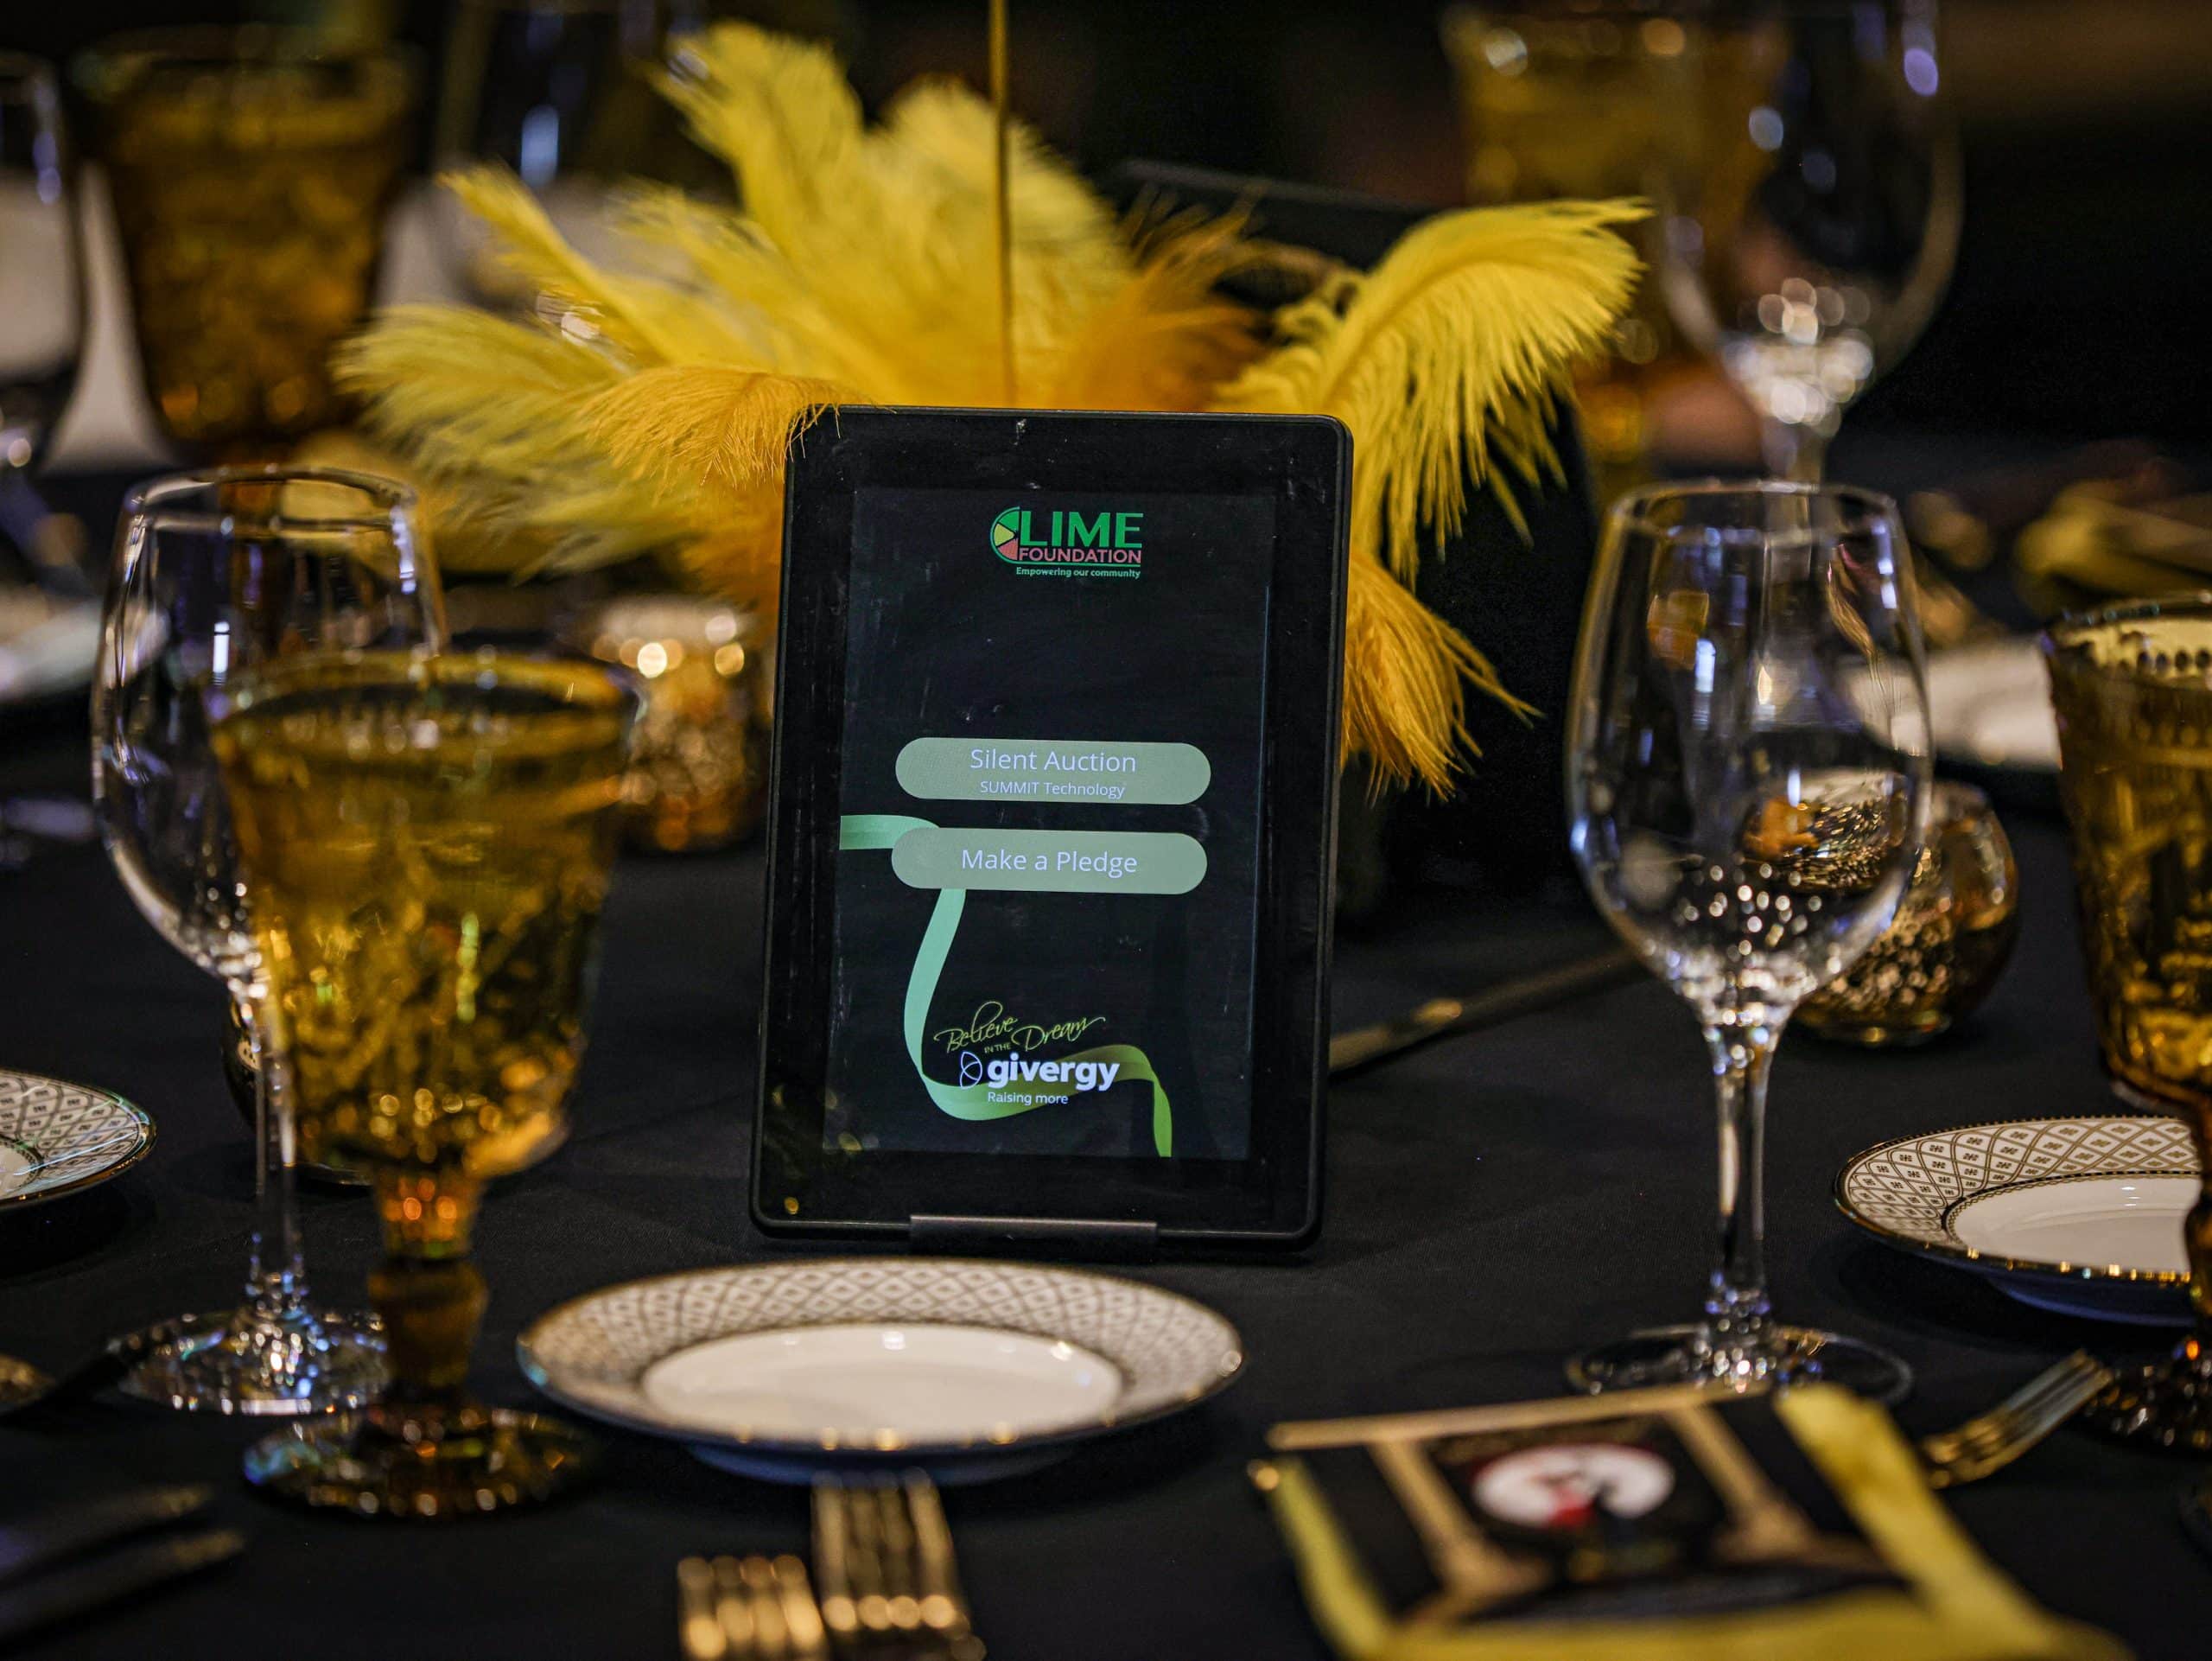 A black and gold table setting with a tablet on it at the Sonoma County Non-Profit Organization.